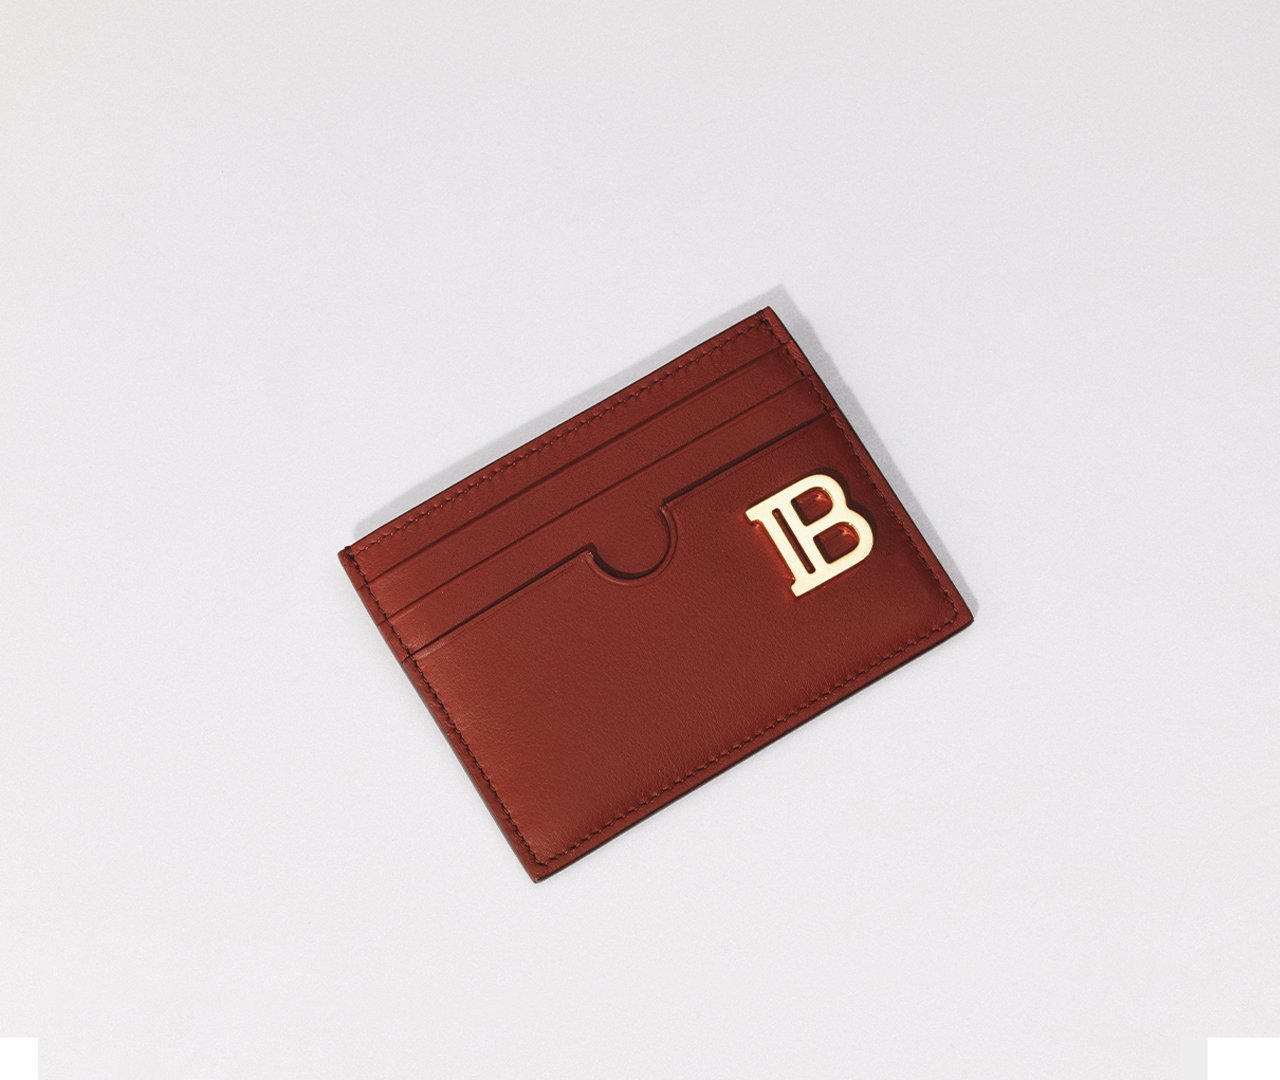 Flannels on Twitter: "For the woman who has everything, the @Balmain cardholder is the perfect for the job: https://t.co/VO4rPNLhn2 BALMAIN #BLOGO #CARDHOLDER #BALMAINPARIS #BALMAINCARDHOLDER https://t.co/hc4DYWIeLd" /